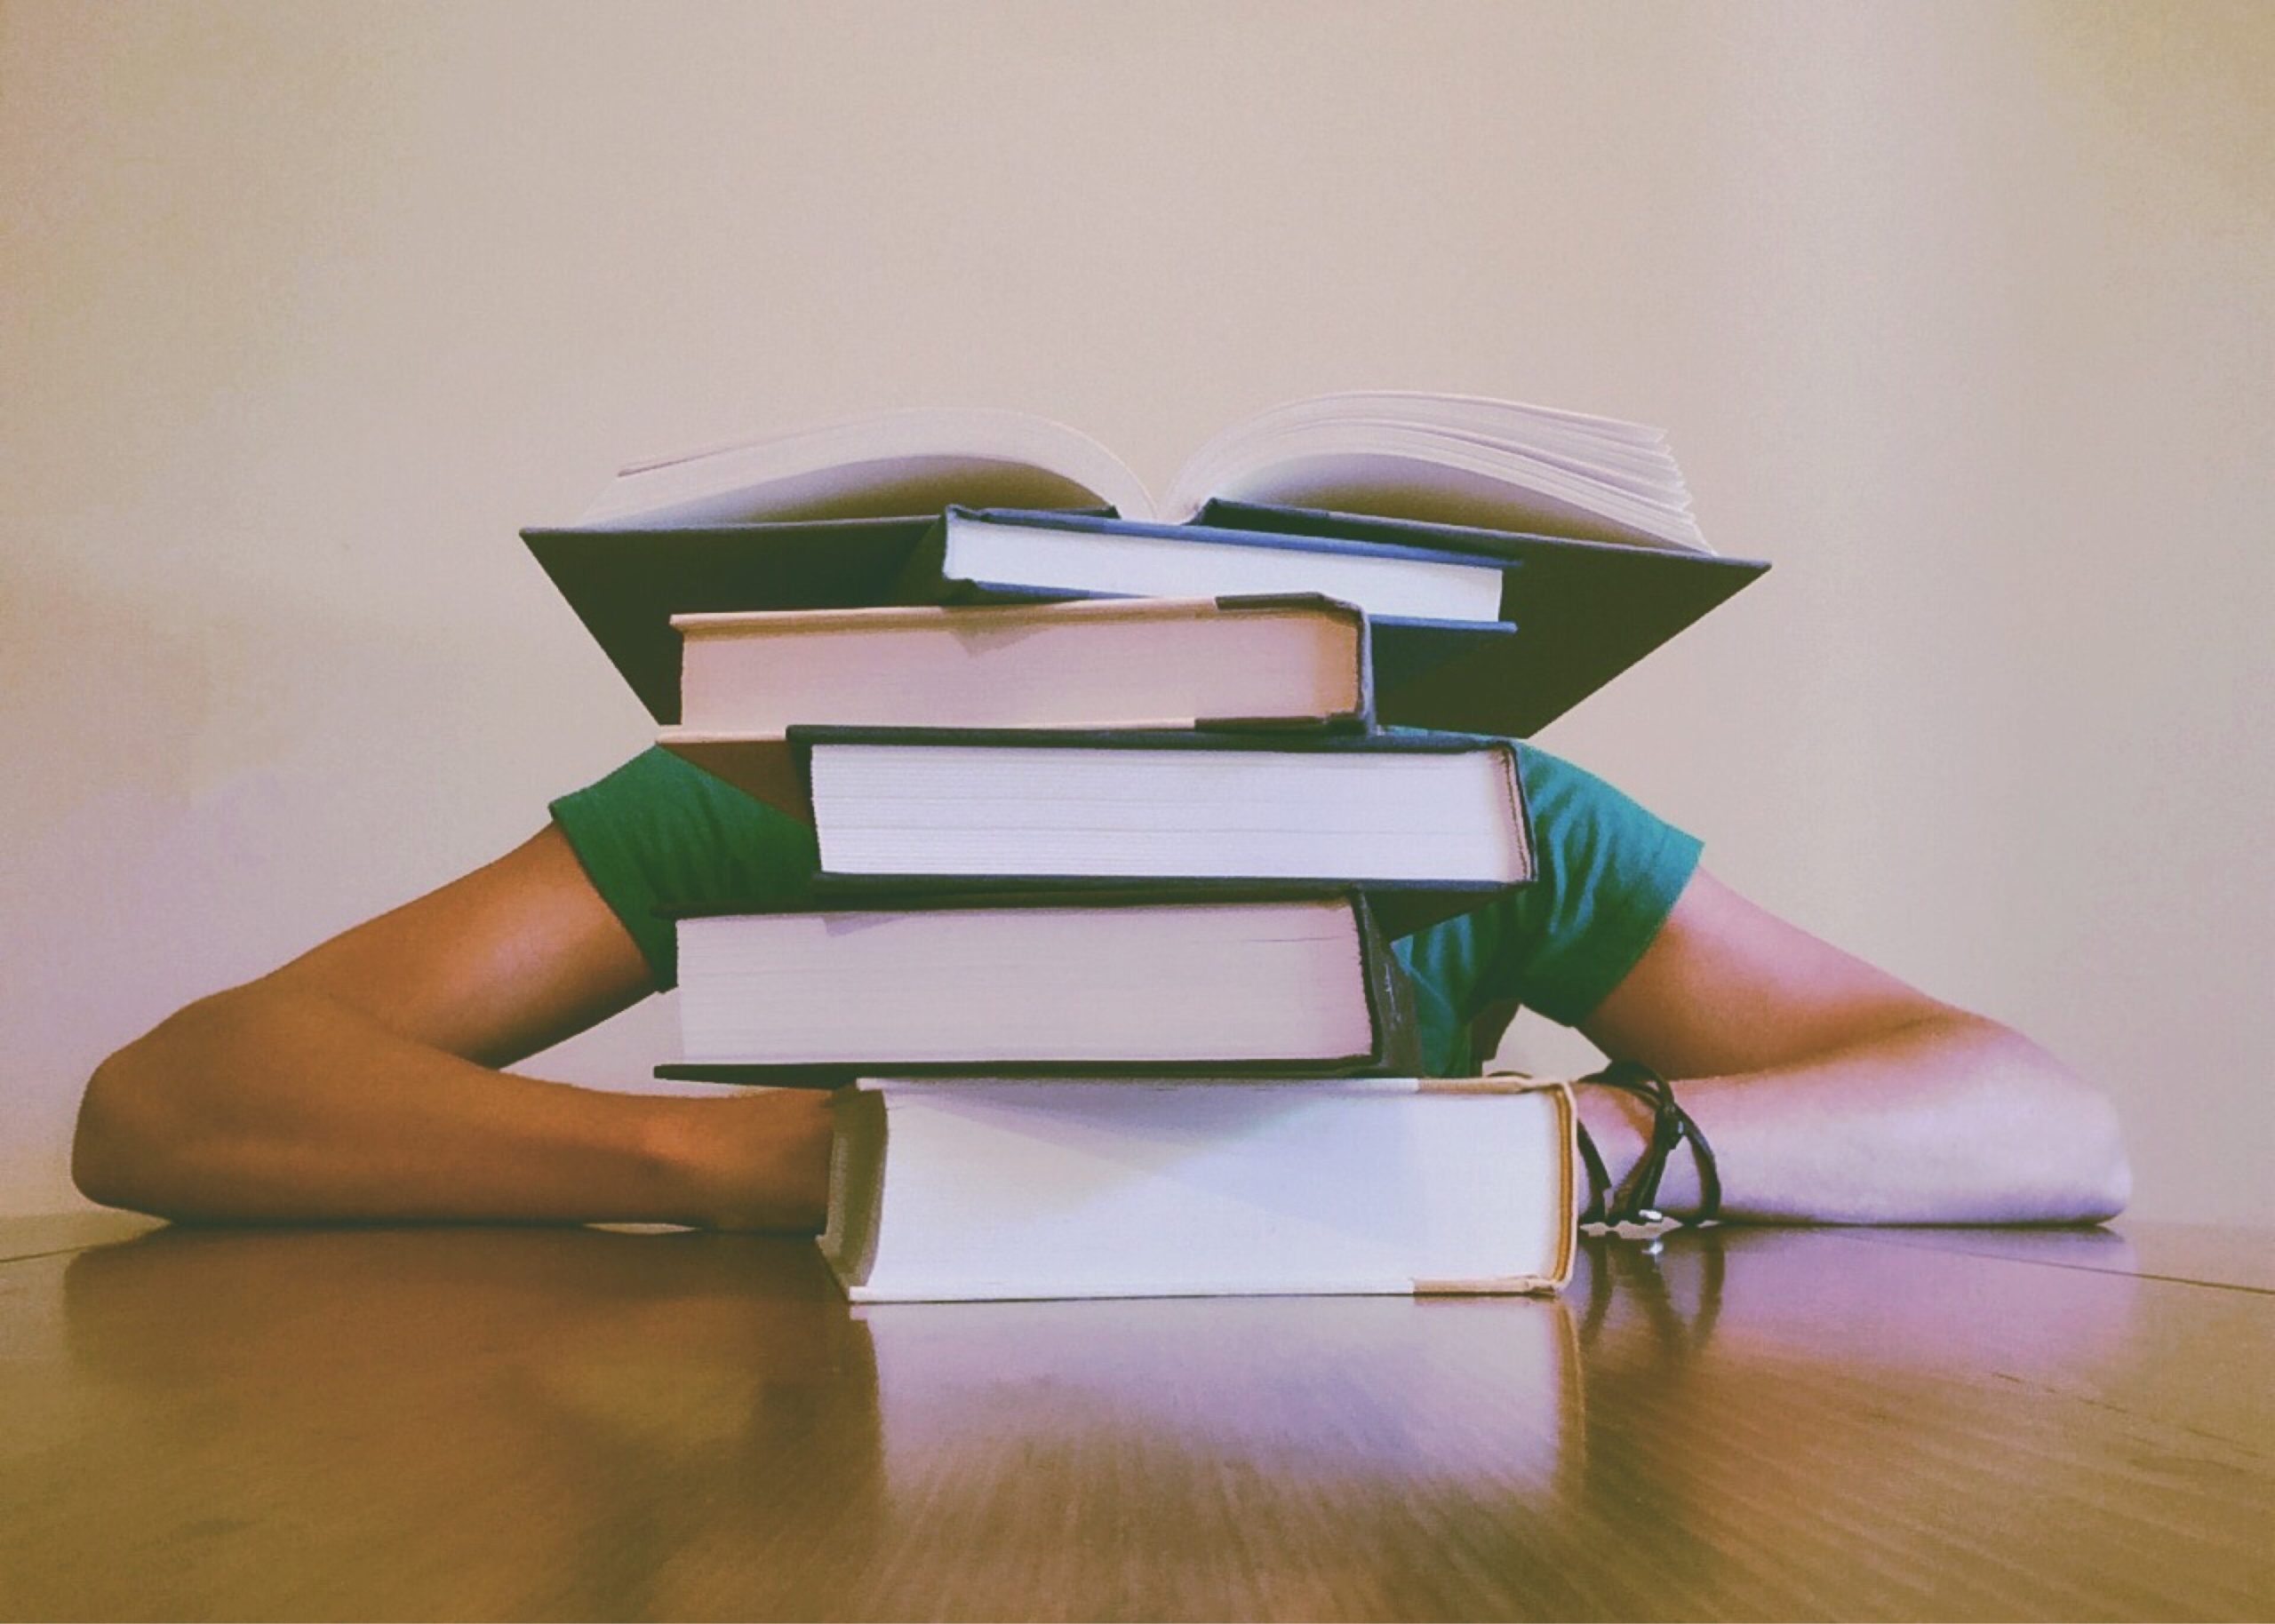 A person in green laying her head on the table with stacks of books in front